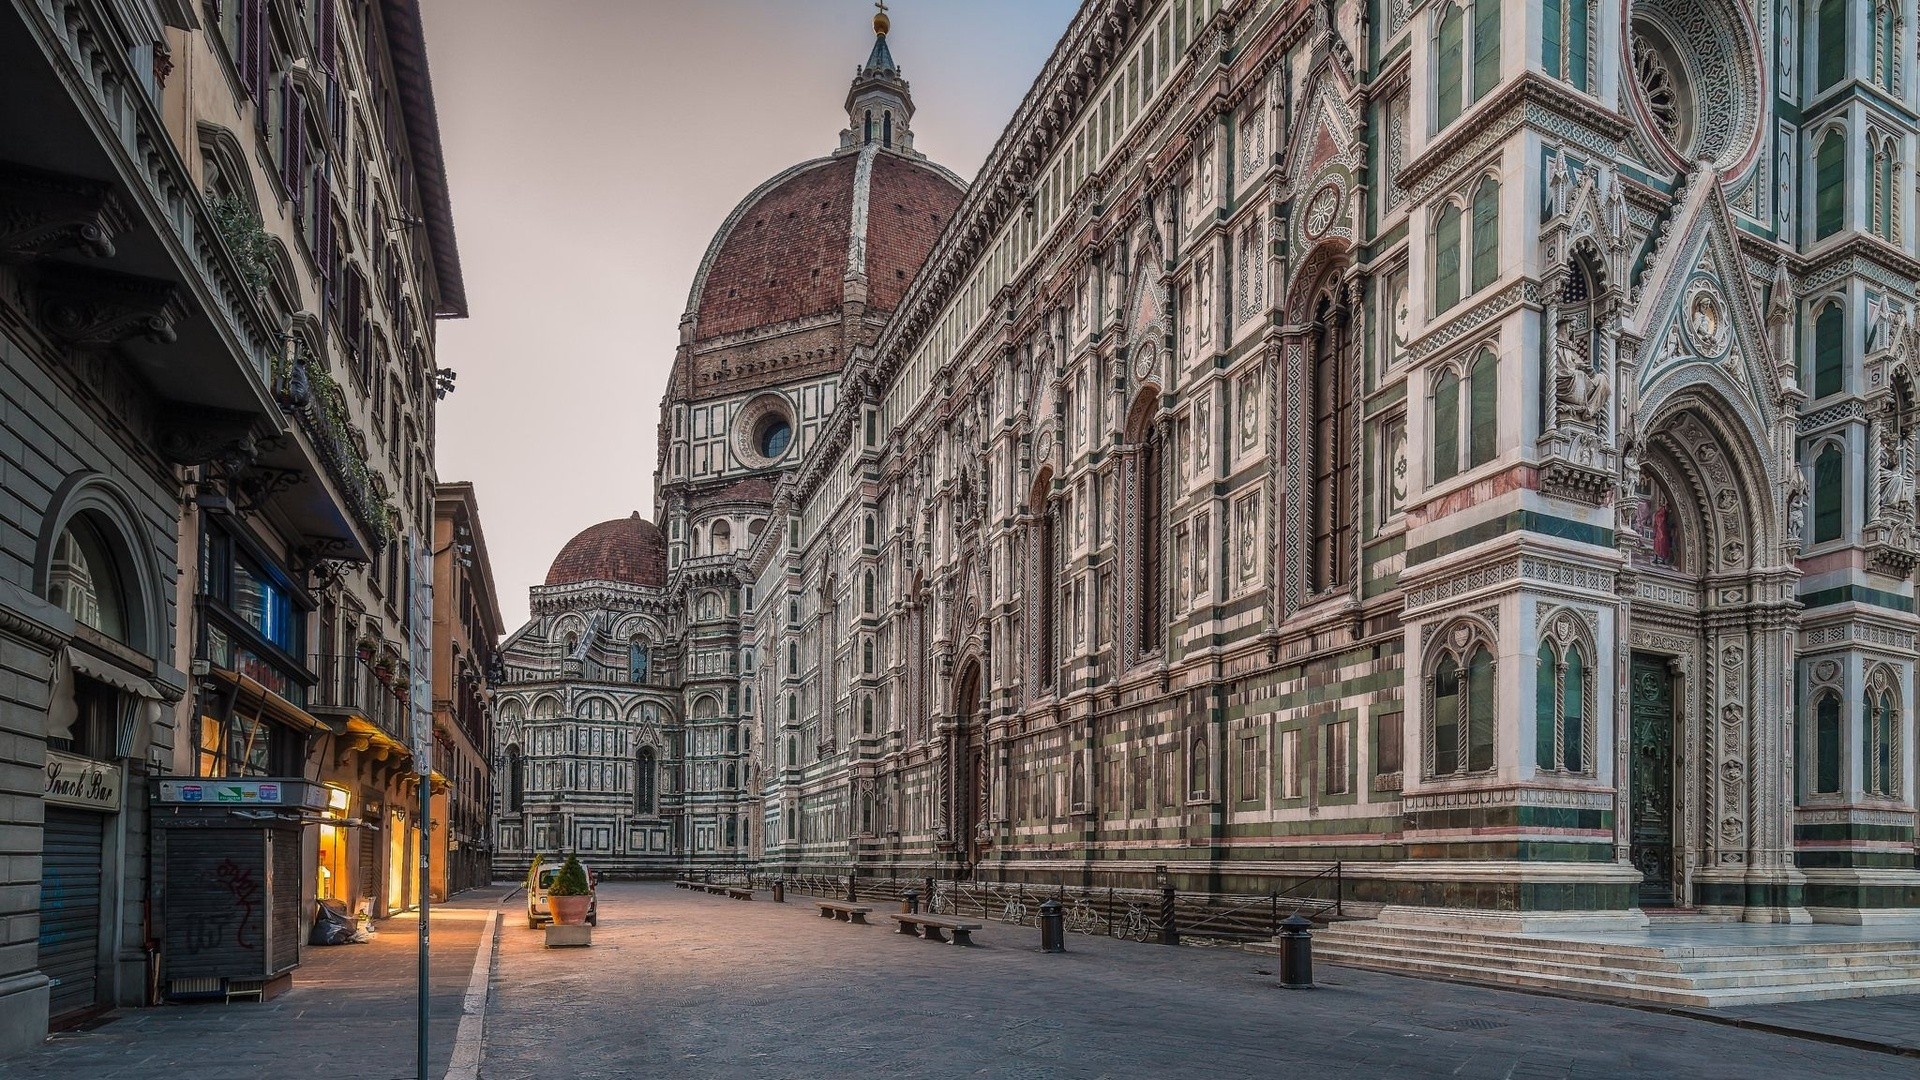 architecture, Old Building, Town, Street, Urban, Florence, Italy, Lights, Cathedral, Arch, Gothic Architecture, Dome, Bench, Car, Europe, Building, Evening Wallpaper